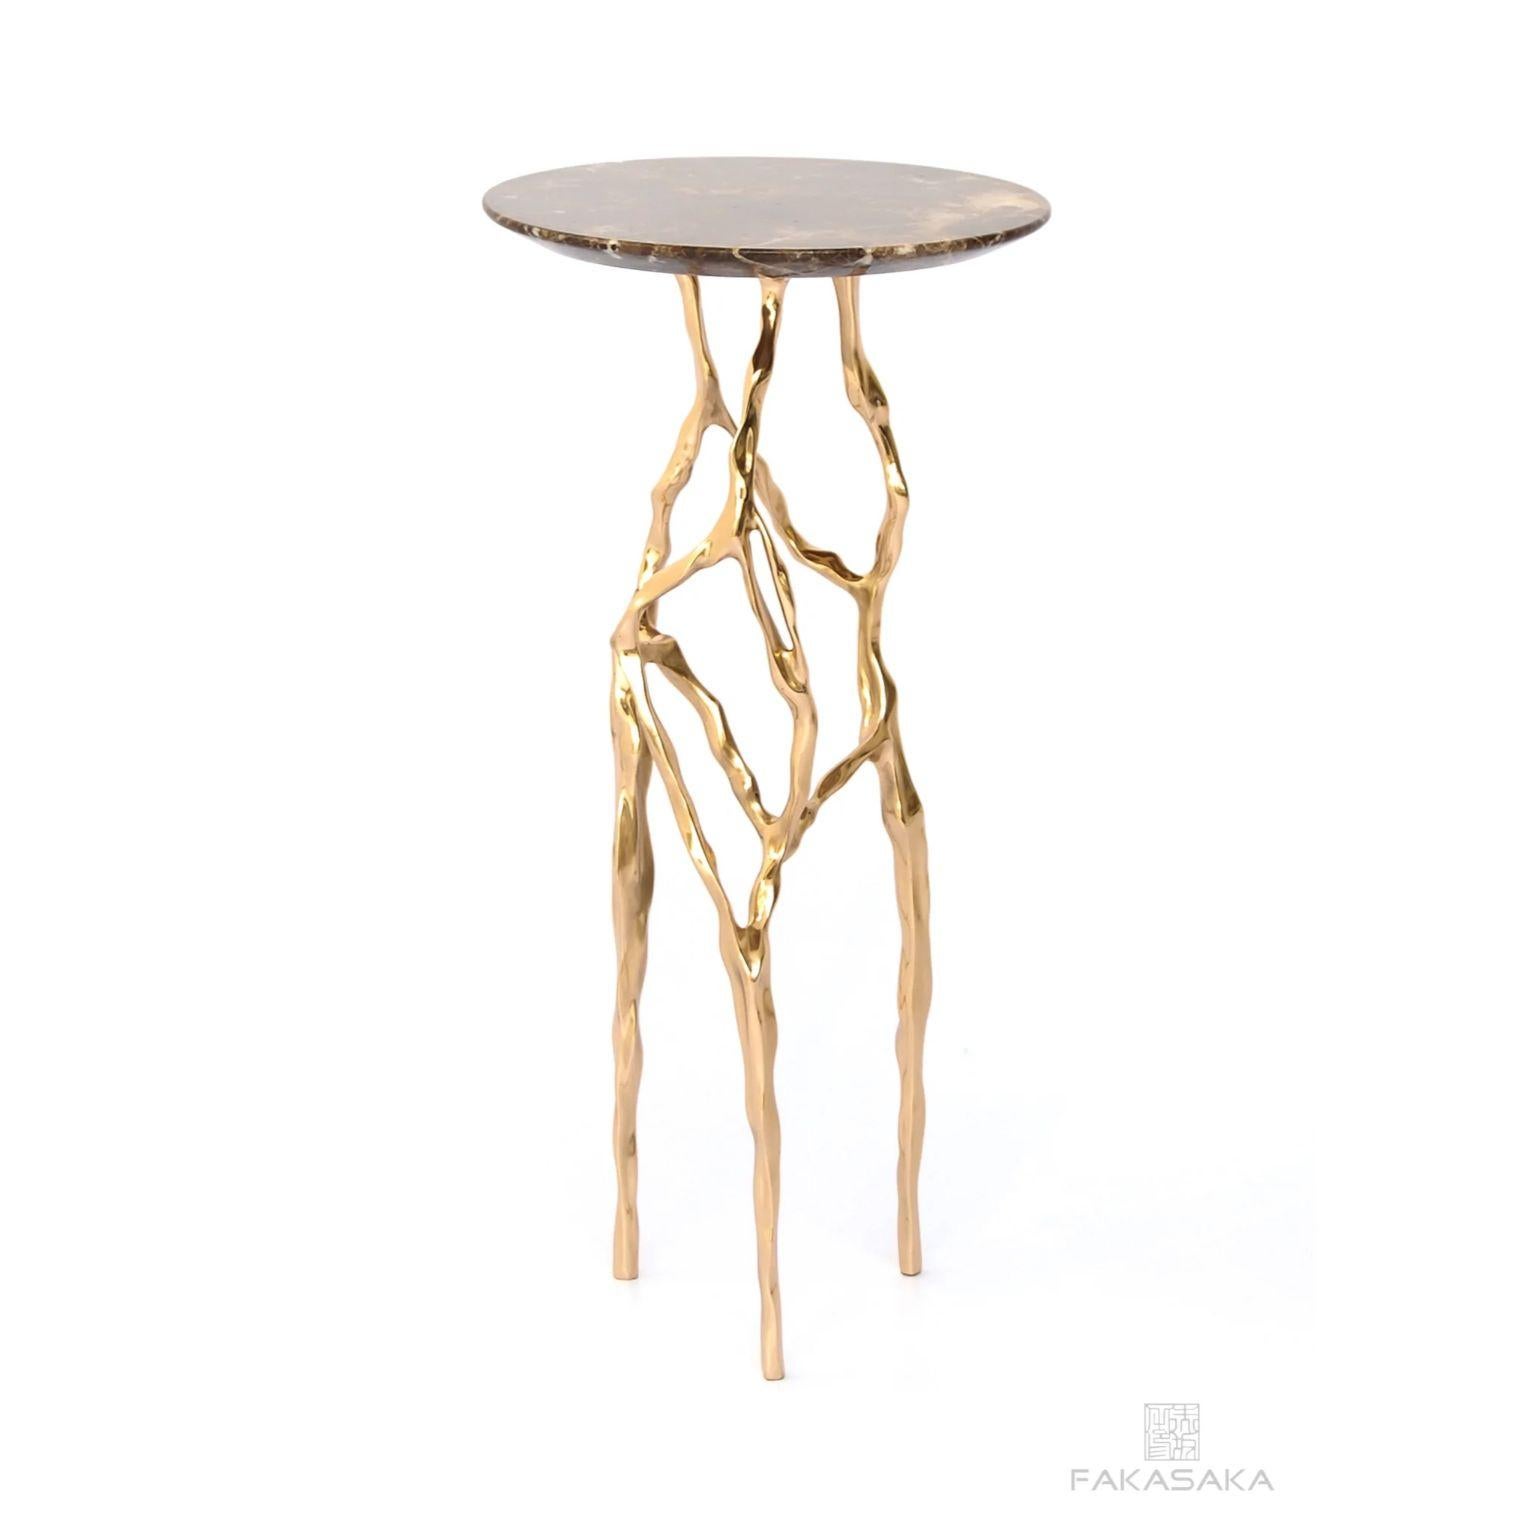 Sid drink table with Marrom Imperial Marble top by Fakasaka Design.
Dimensions: W 30 cm, D 30 cm, H 61 cm.
Materials: polished bronze base, Marrom Imperial marble top.
 
Also available in different table top materials:
Nero Marquina Marble